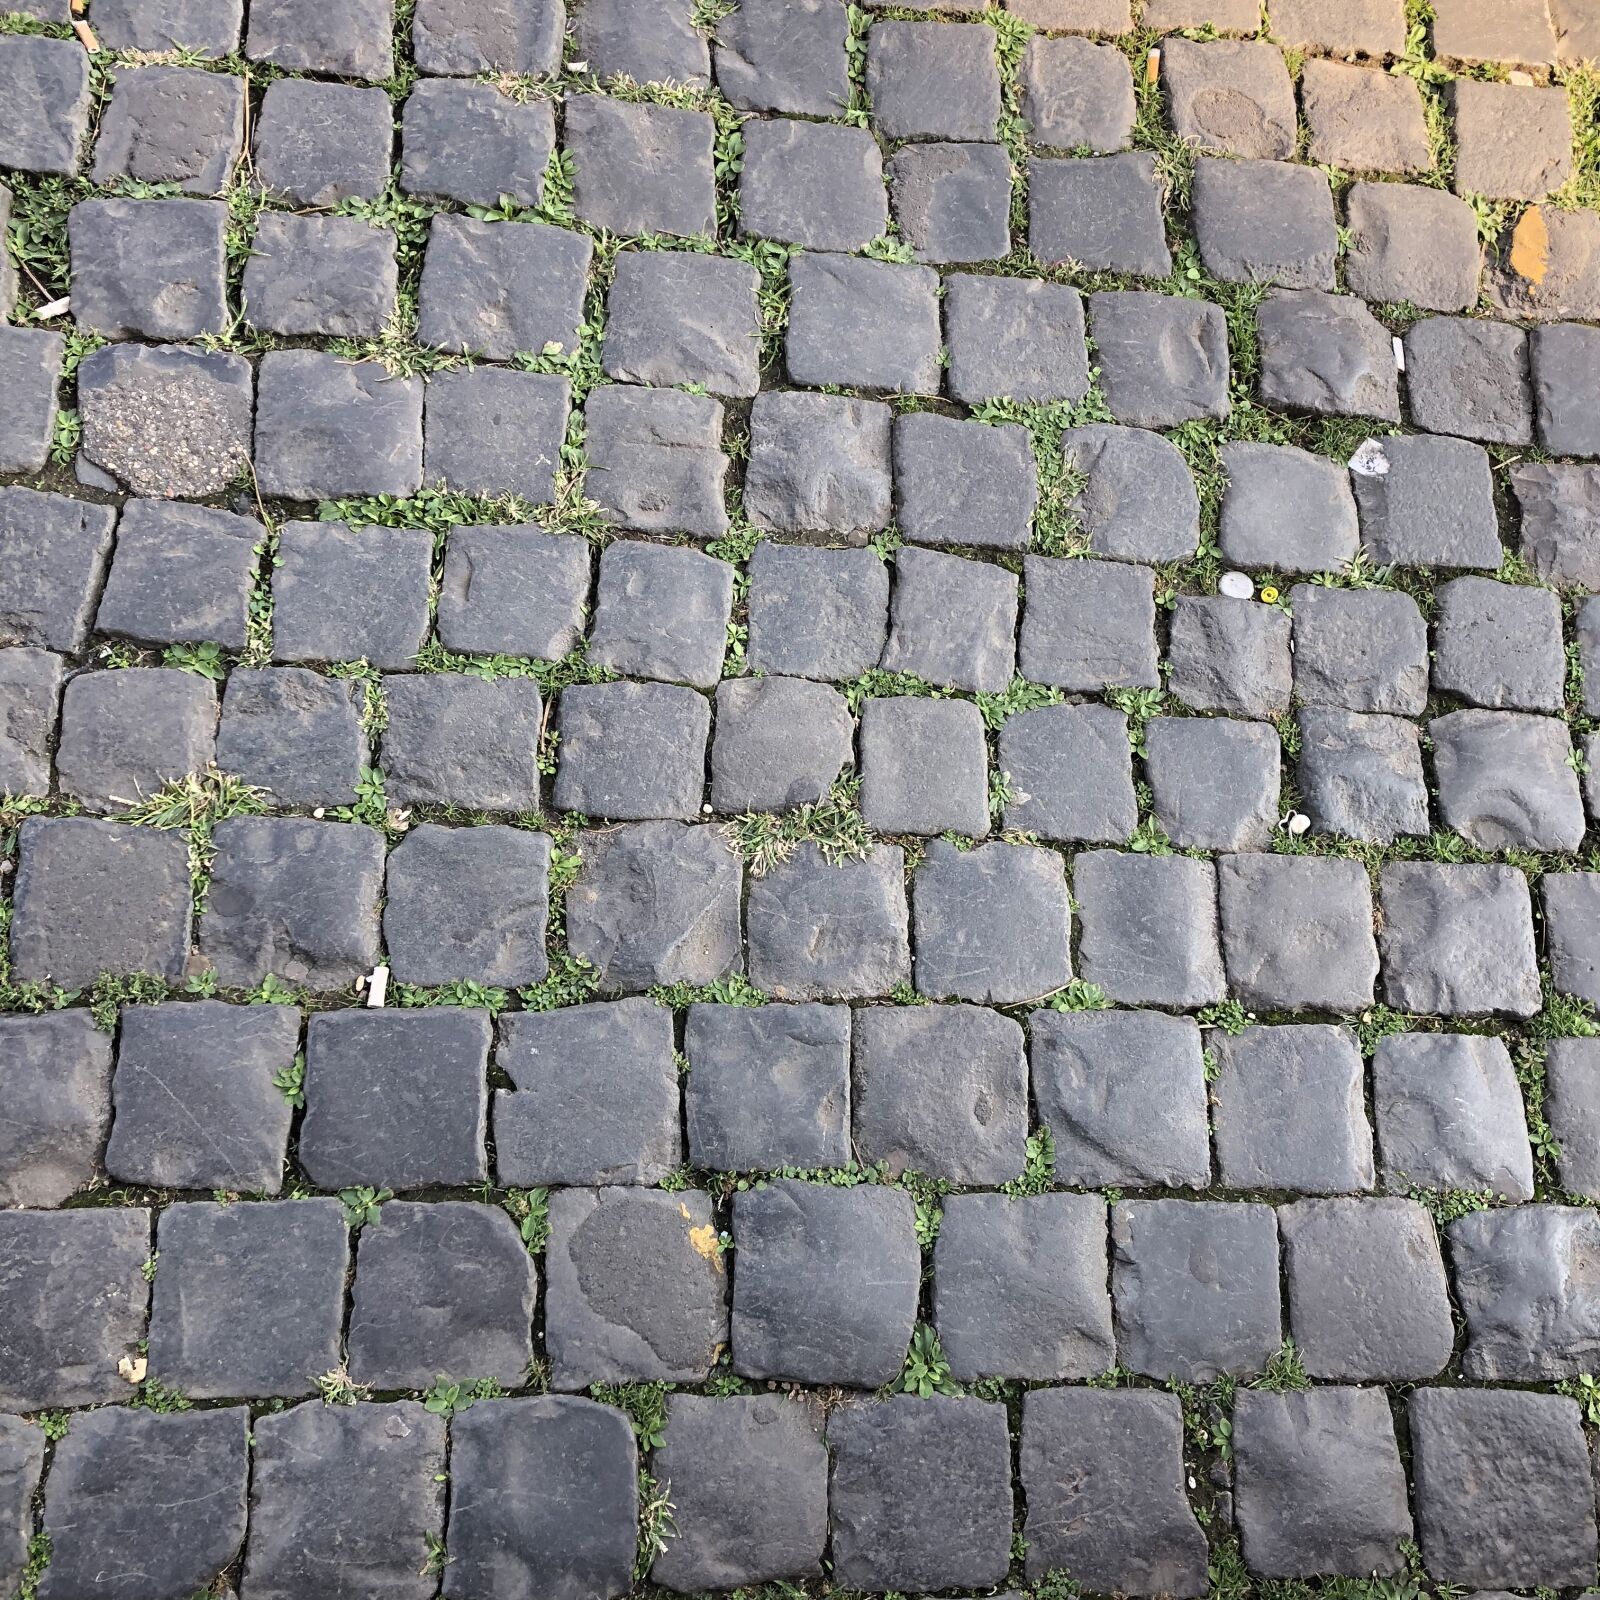 Apple iPhone 8 + iPhone 8 back camera 3.99mm f/1.8 sample photo. Cobblestone, footpath, texture photography